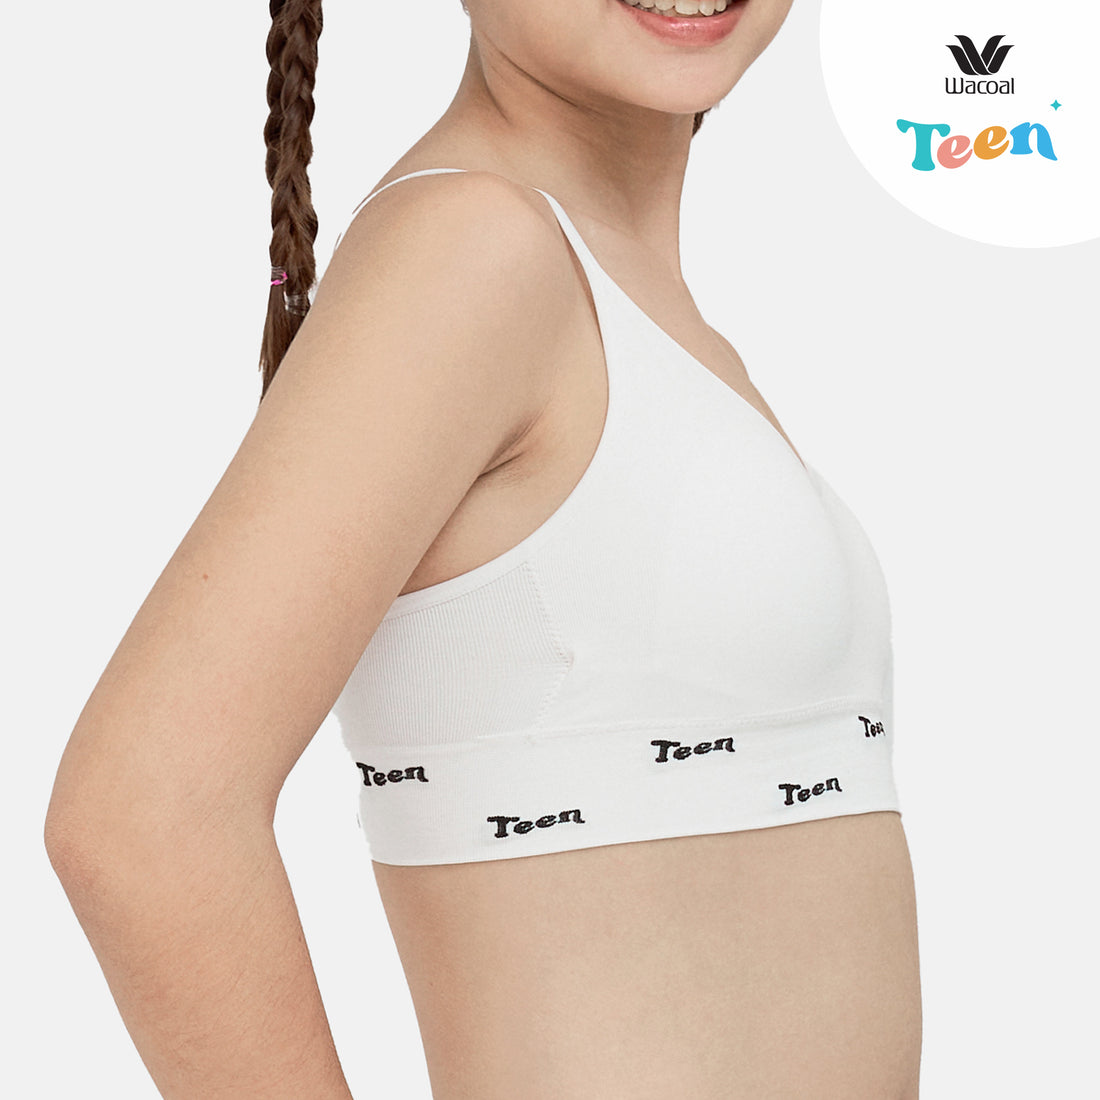 Wacoal Teen underwear for young adults, wireless bra, model WBT111, cream color (CR)